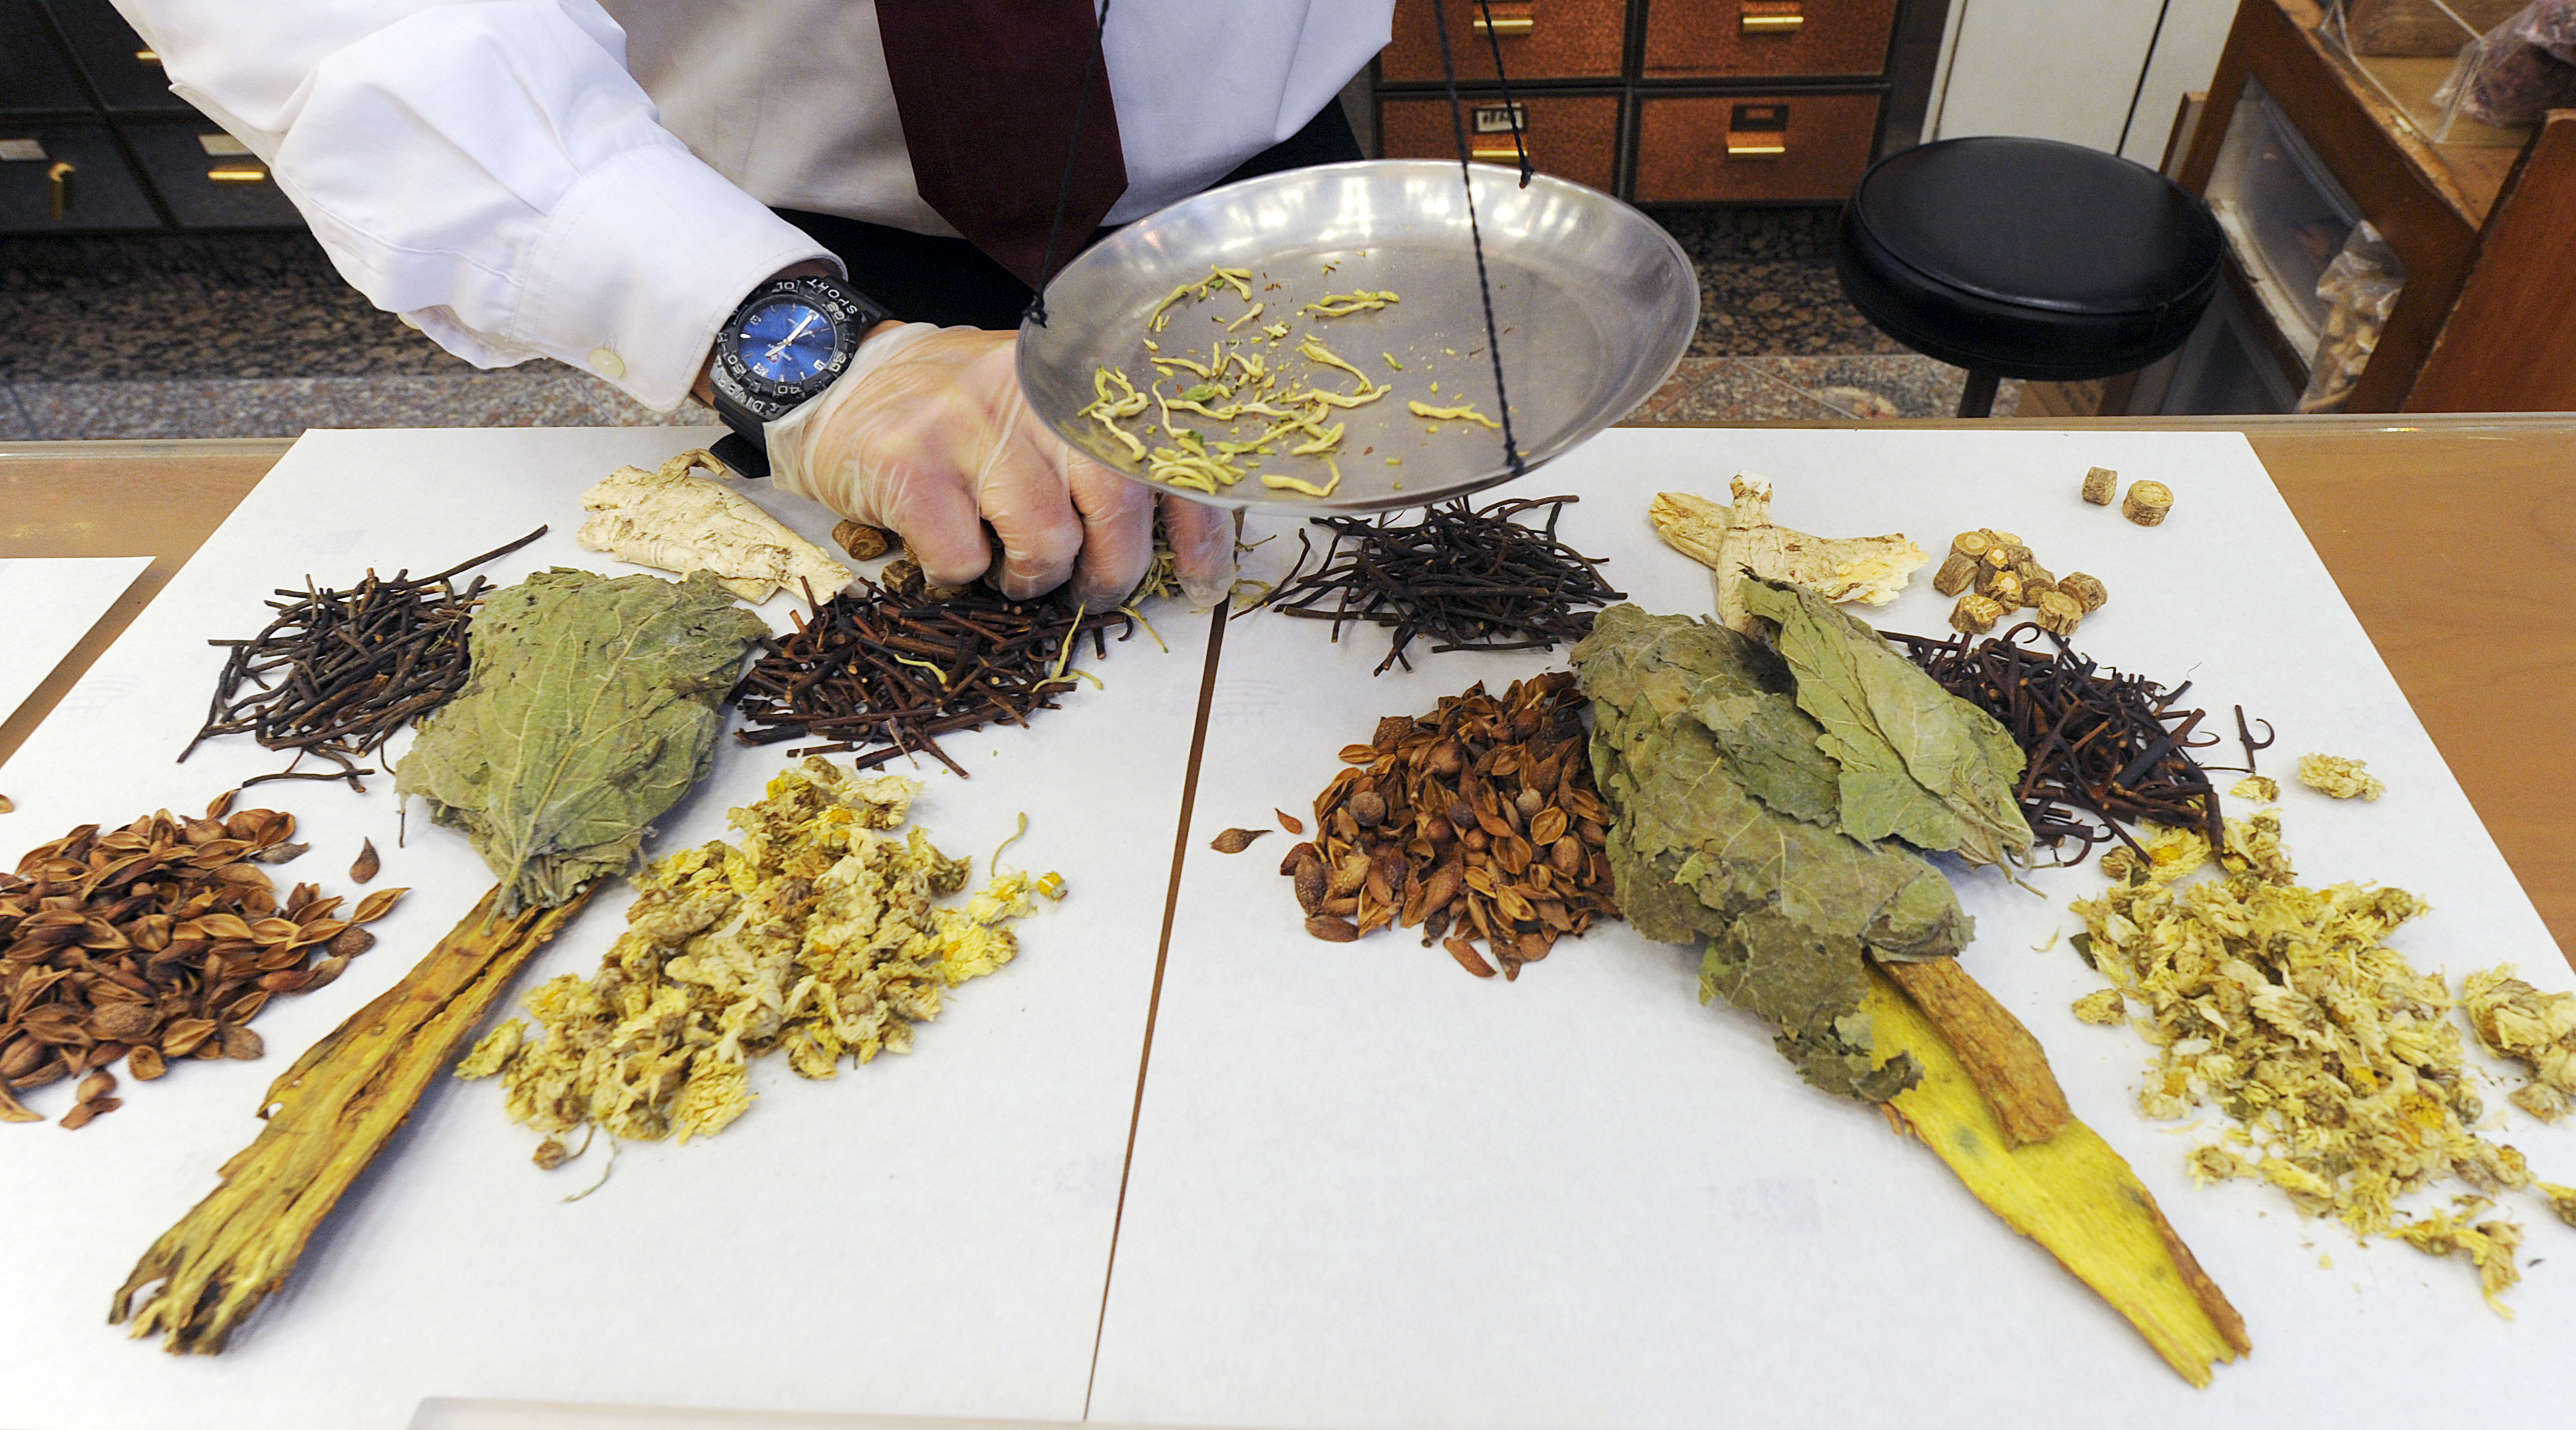 More than 8,000 Chinese remedies face being taken off the shelves under new government proposals. Photo: AFP